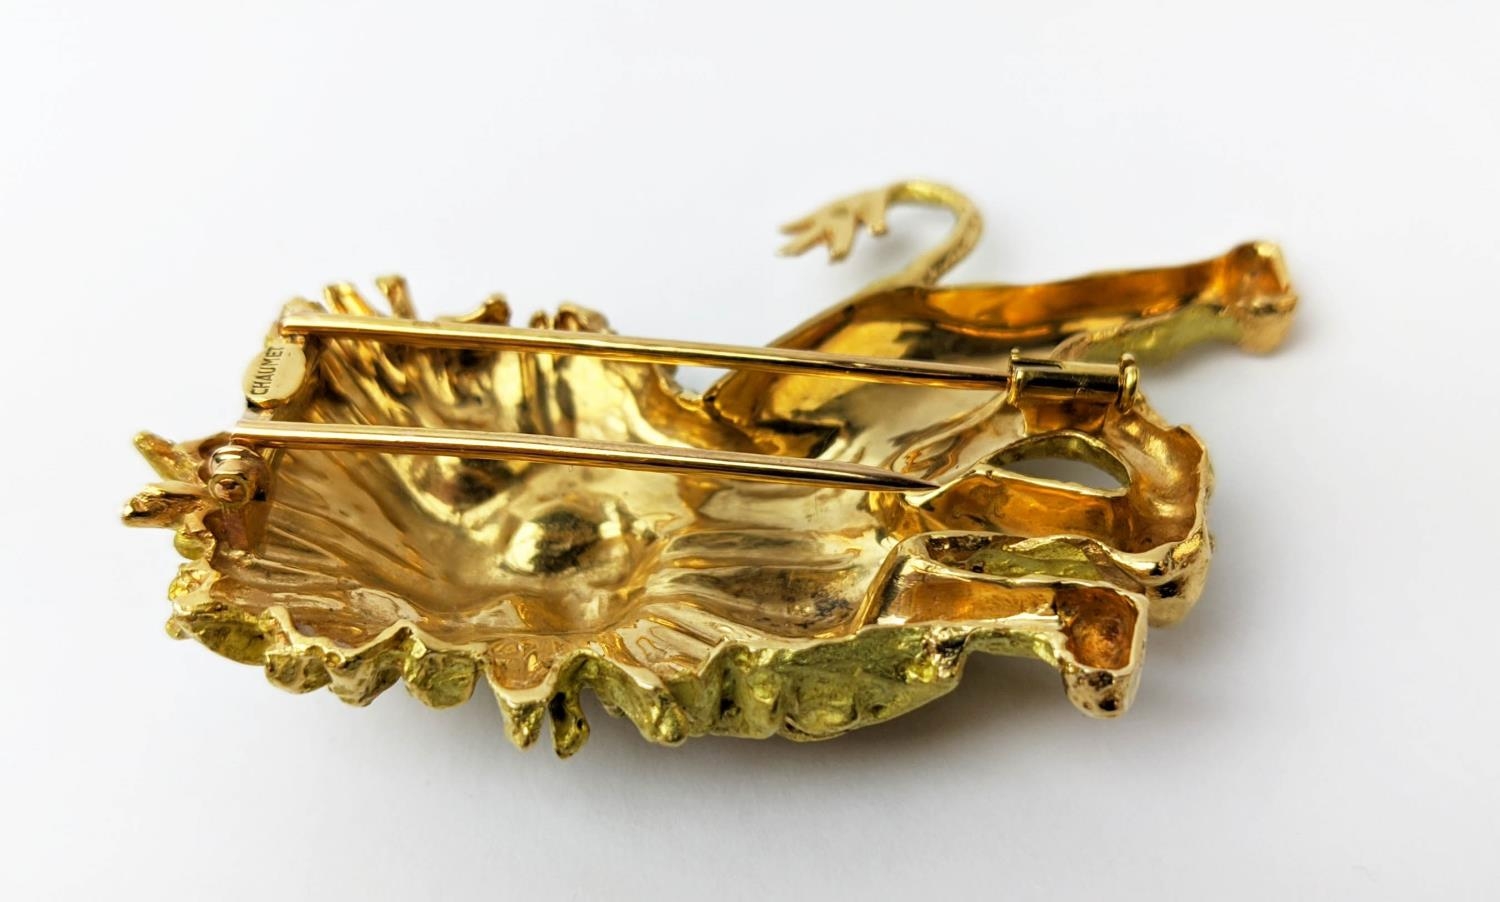 AN 18CT GOLD 'CHAUMET' LION BROOCH, textured finish, made in parts, 33.38 grams, probably 1970s. - Image 3 of 9